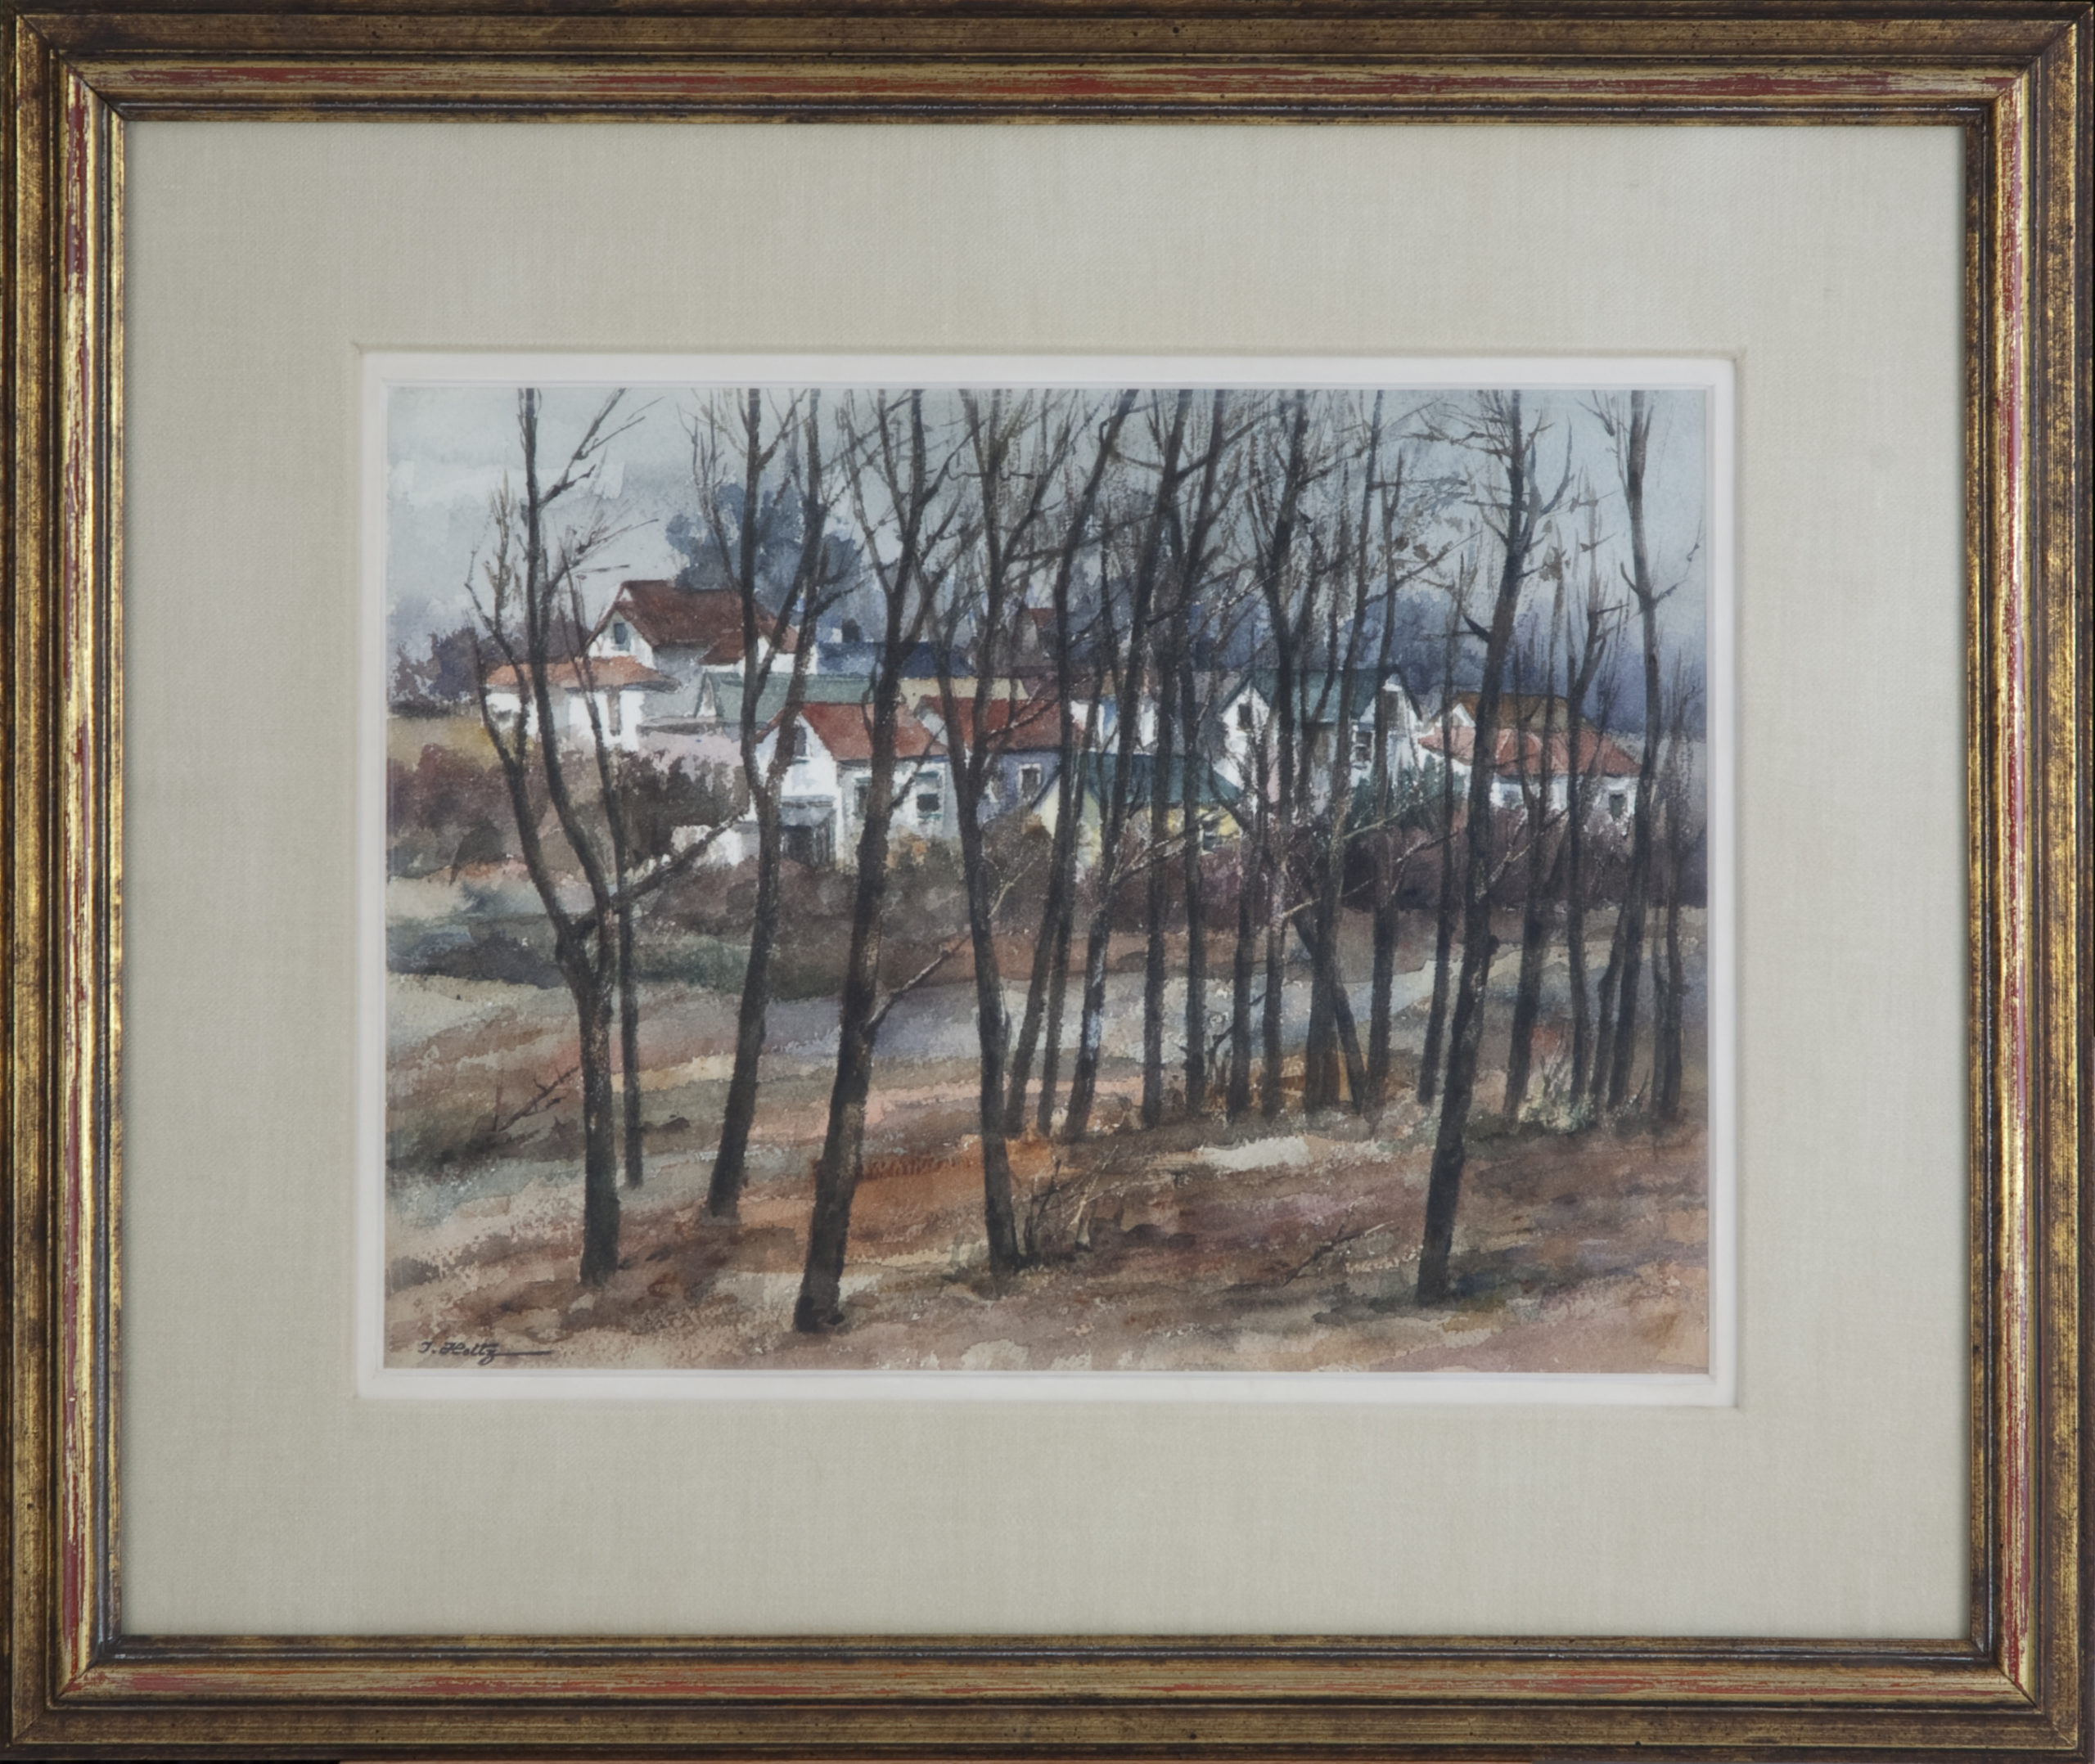 153 Countryside in Winter 1964 - Watercolor - 15.5 x 11.5 - Frame: 24.5 x 20.75 x 1